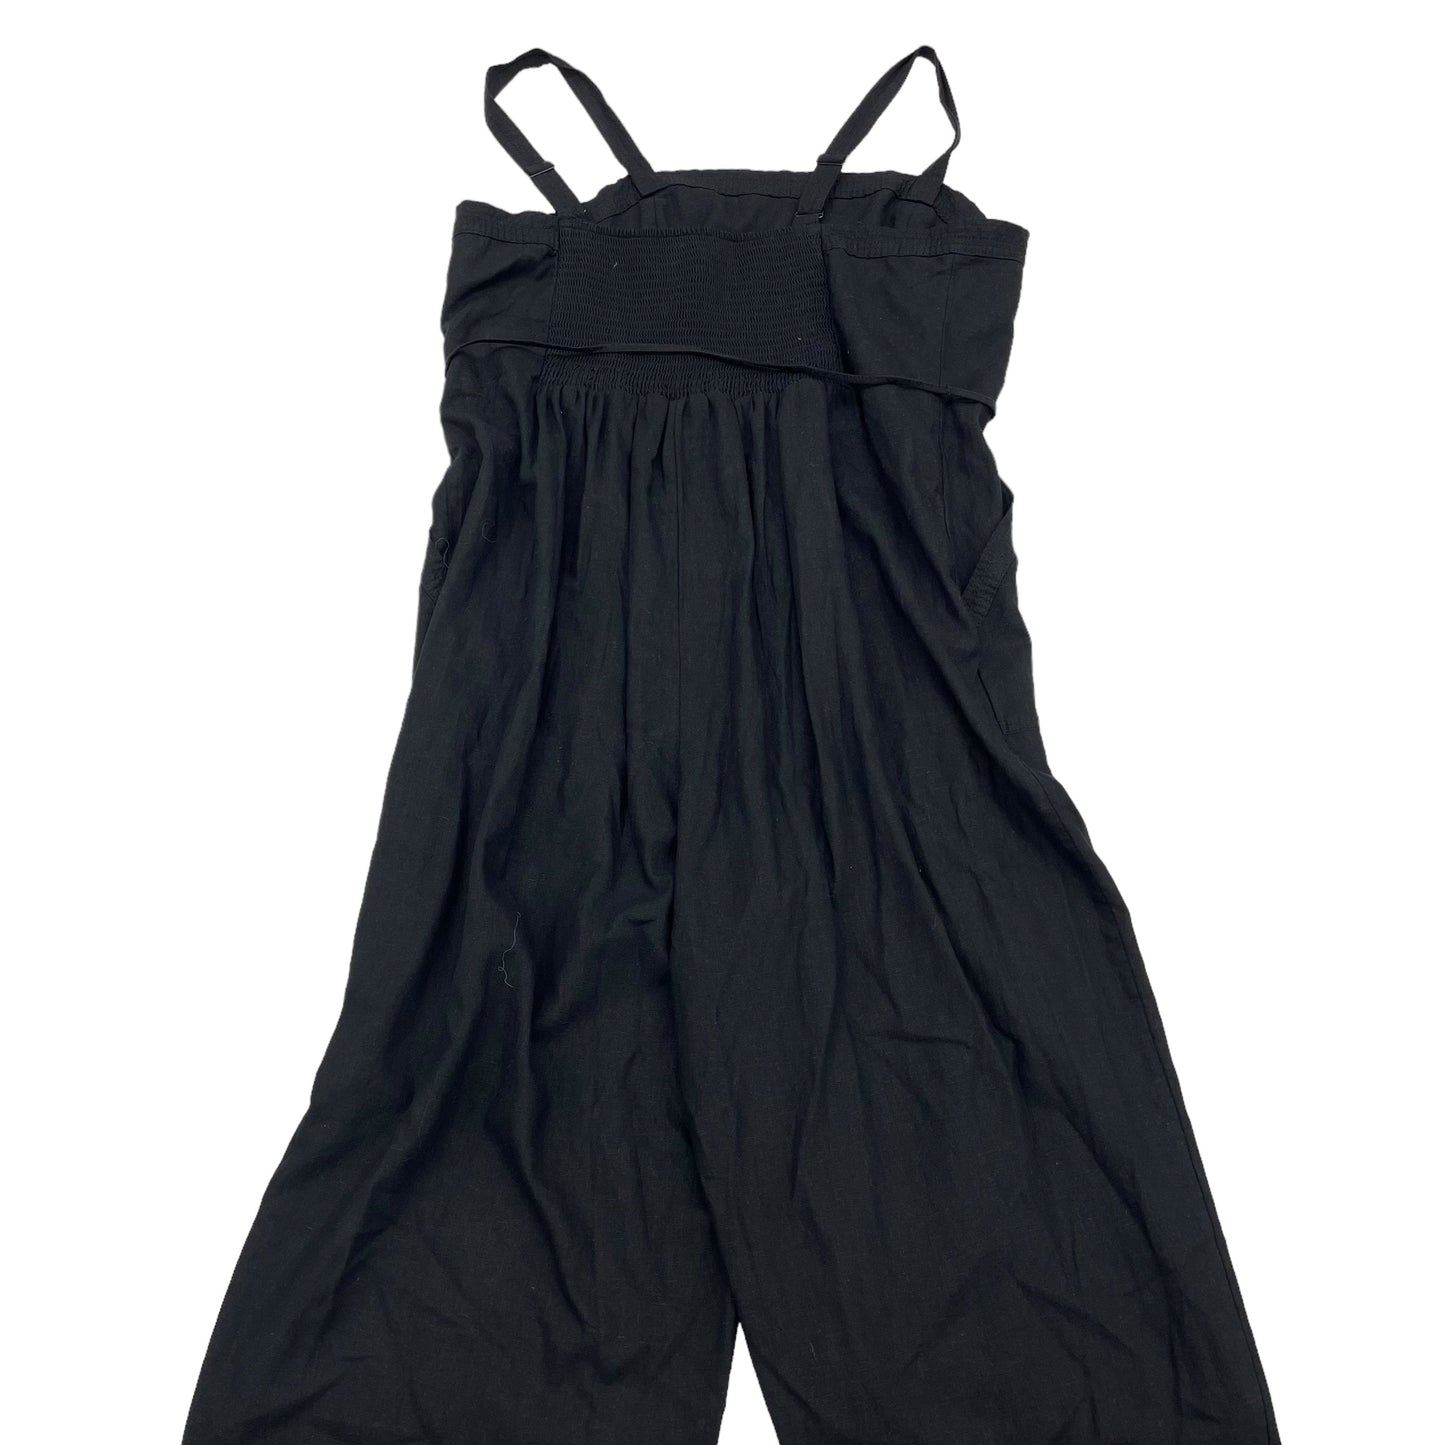 BLACK JUMPSUIT by OLD NAVY Size:2X